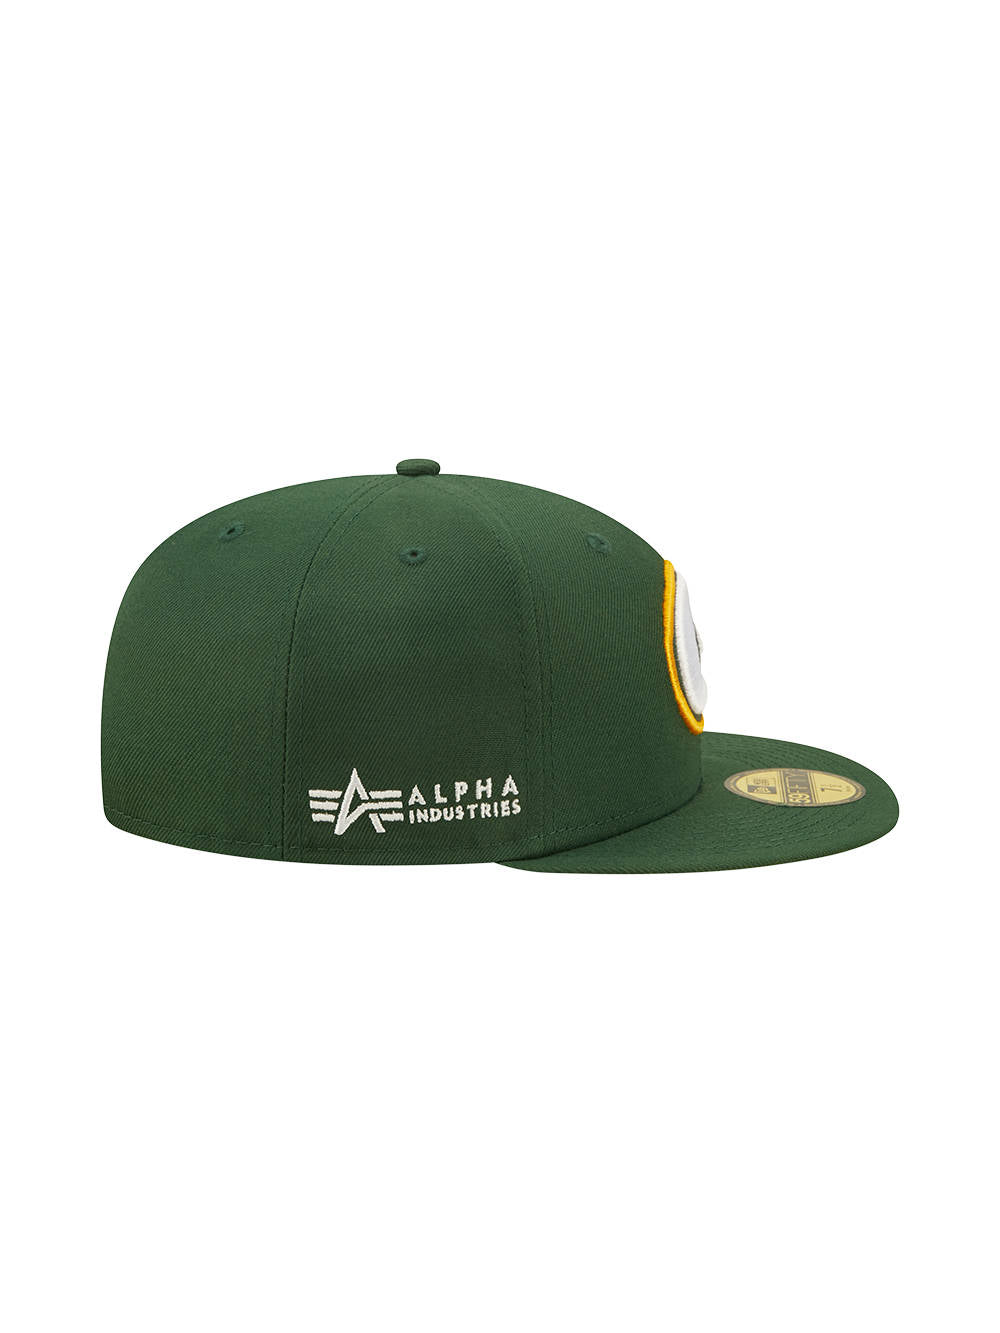 GREEN BAY PACKERS X ALPHA X NEW ERA 59FIFTY FITTED CAP ACCESSORY Alpha Industries 